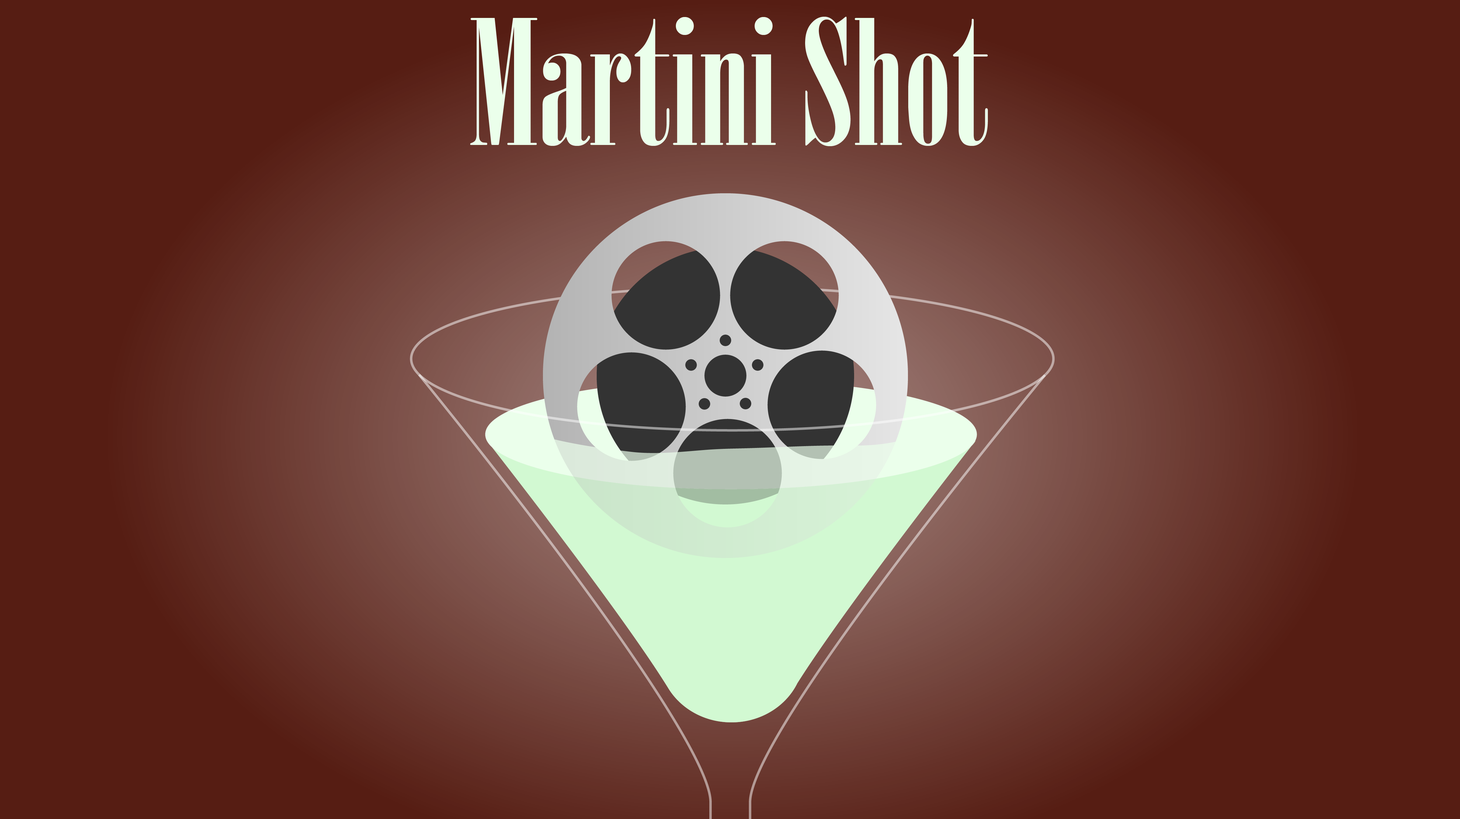 This is Rob Long and on today’s Martini Shot I talk about the worst pitch I ever heard about, which involved a basketball, hot coffee, and a writer with bad aim.